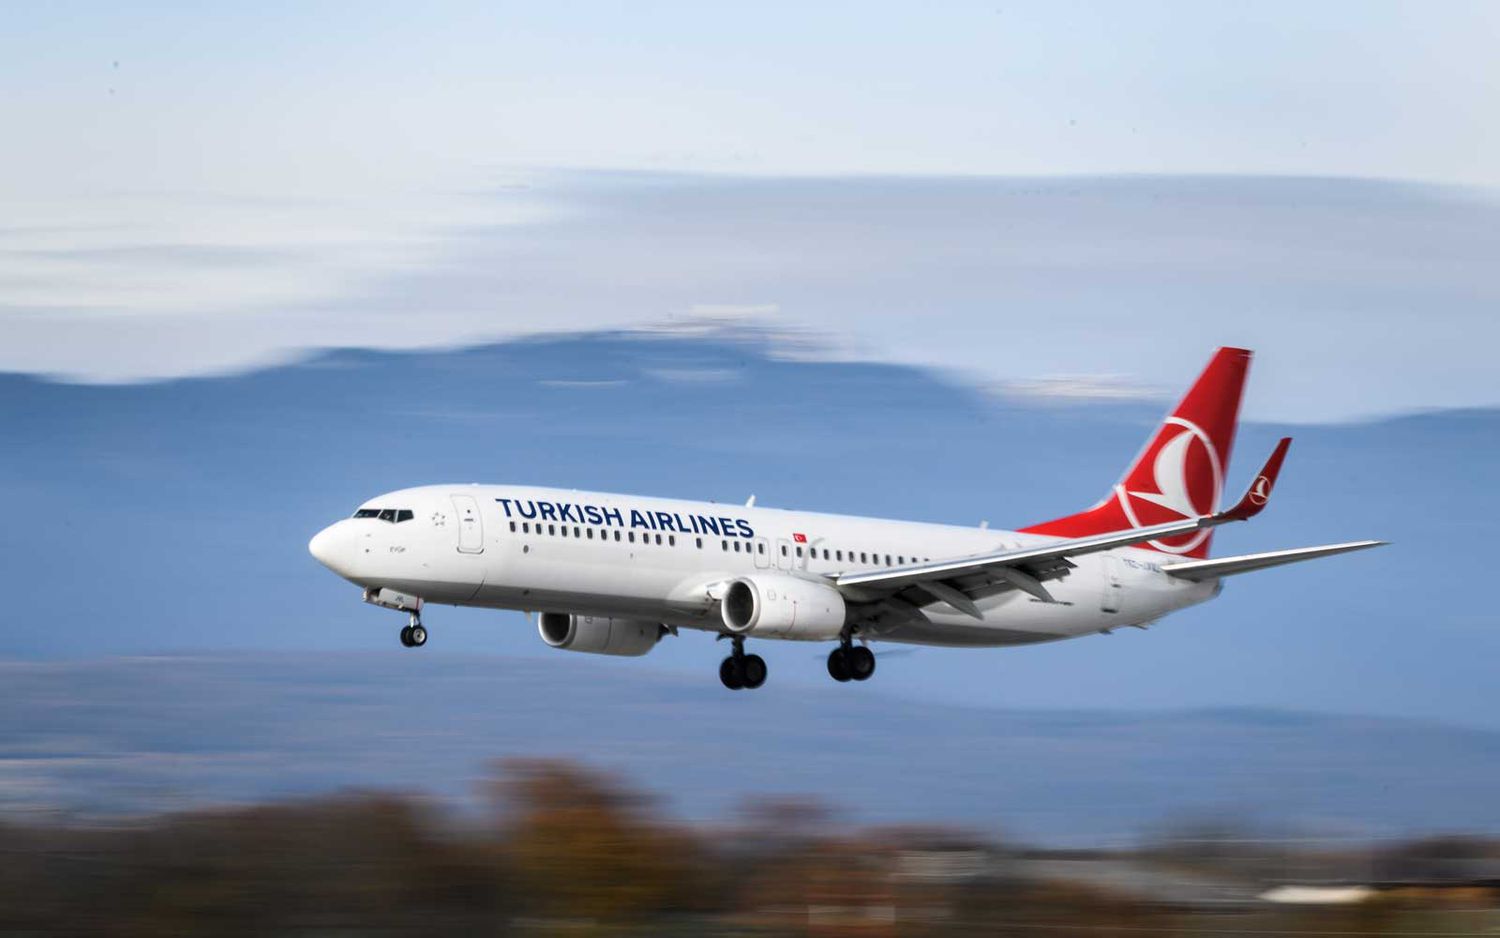 Turkish Airlines Cancellation Policy: Domestic and International flights